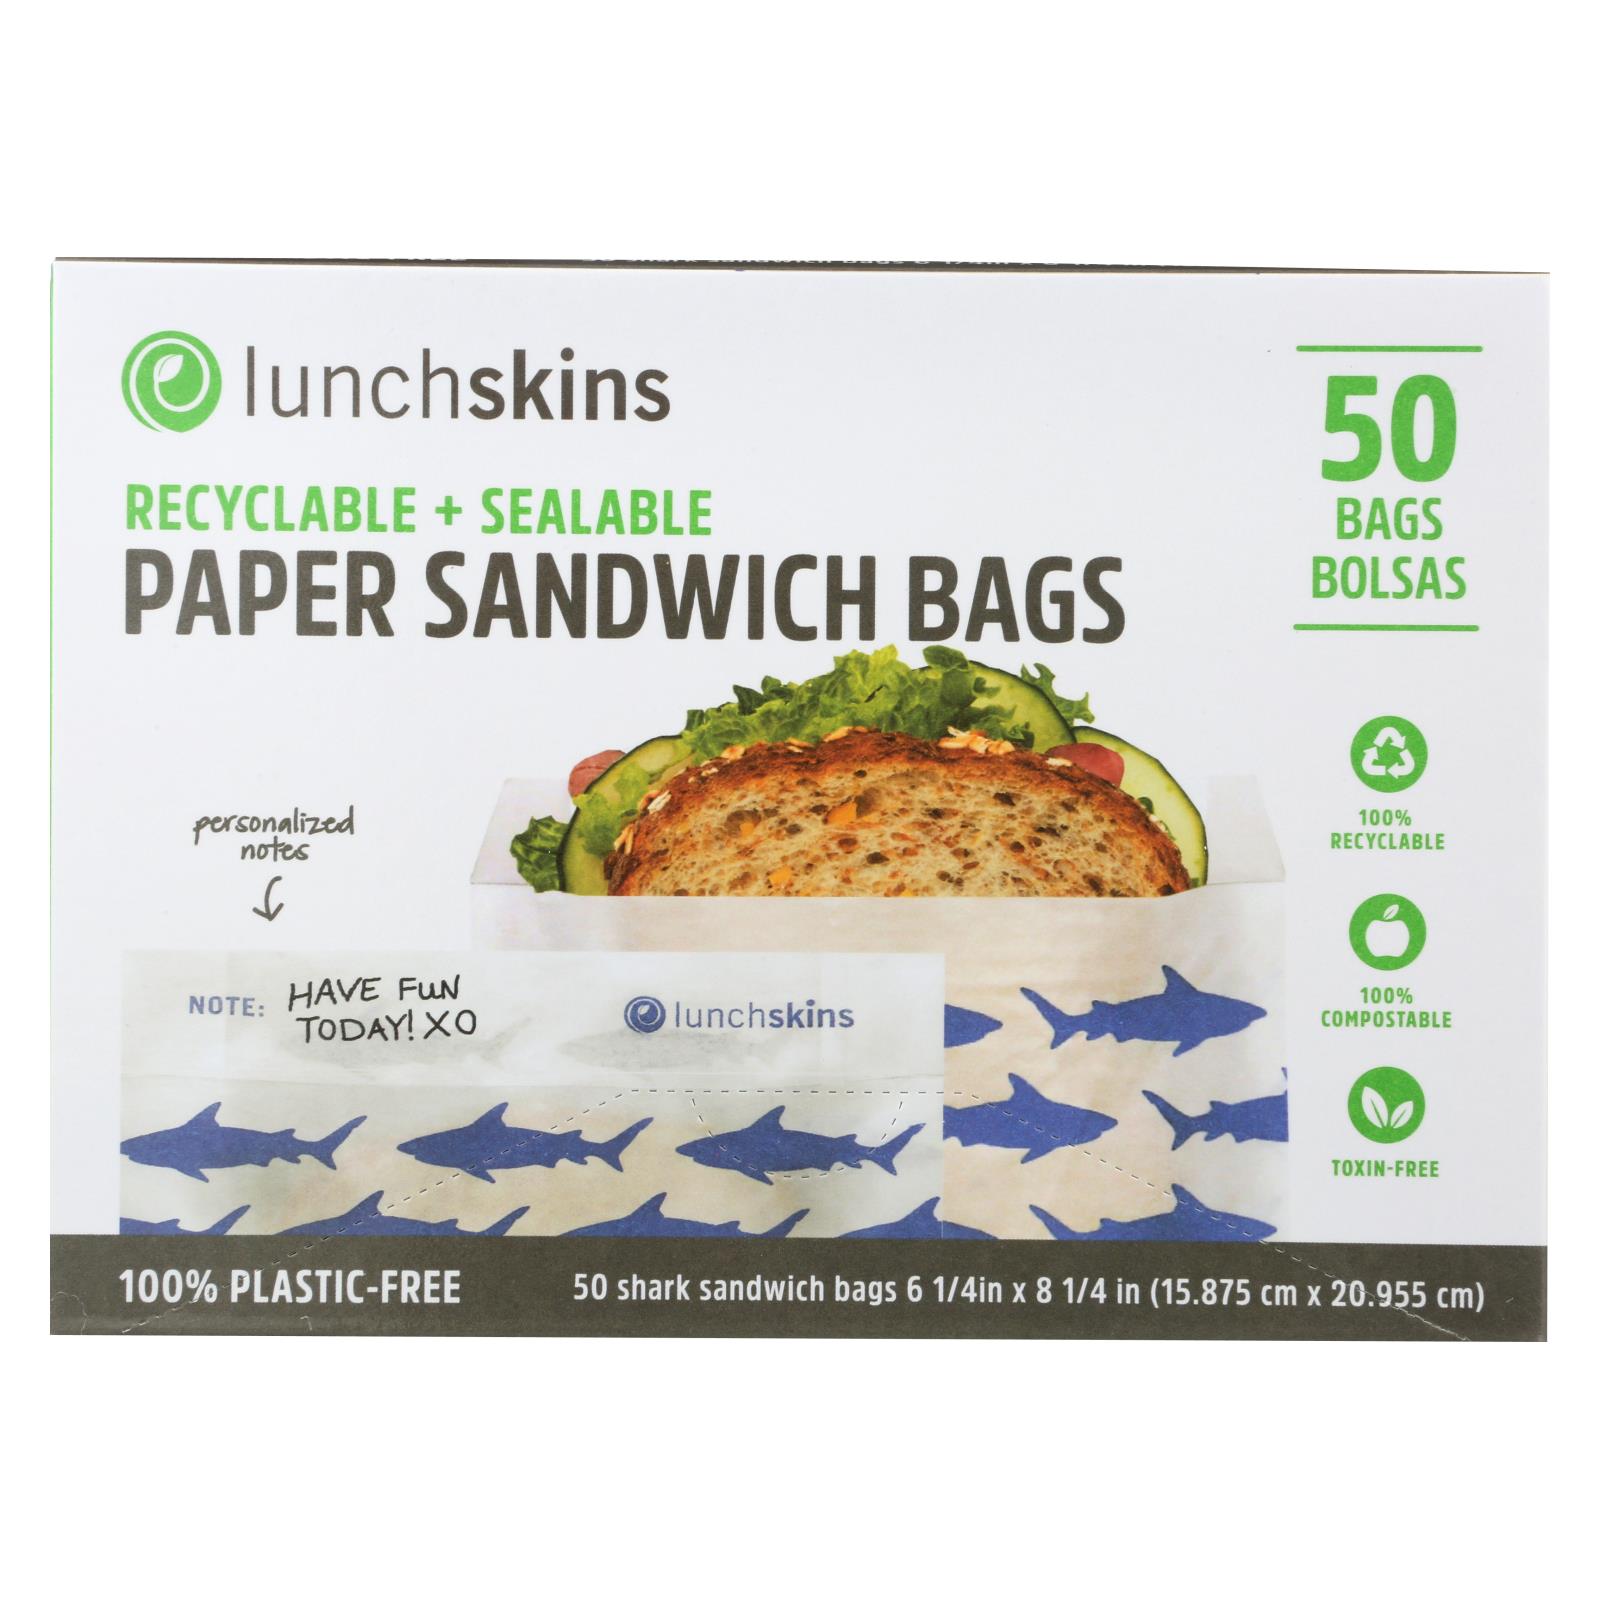 Lunchskins - Recyclable and Sealable Paper Sandwich Bags - Shark - 12개 묶음상품 - 50 Count